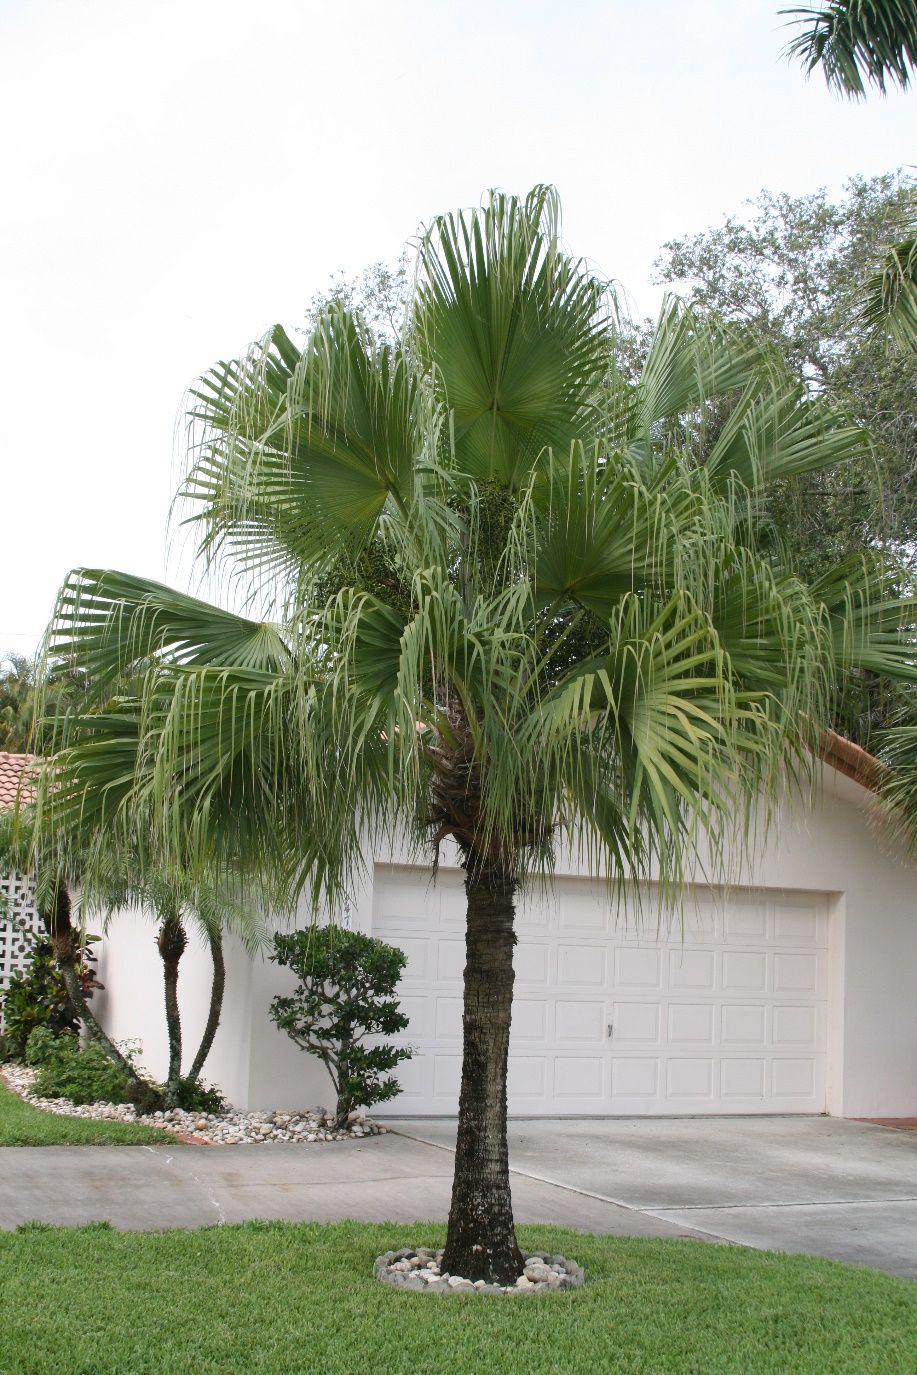 Chinese fan palm showing round canopy of green leaves. Dead leaves have been pruned for appearance.